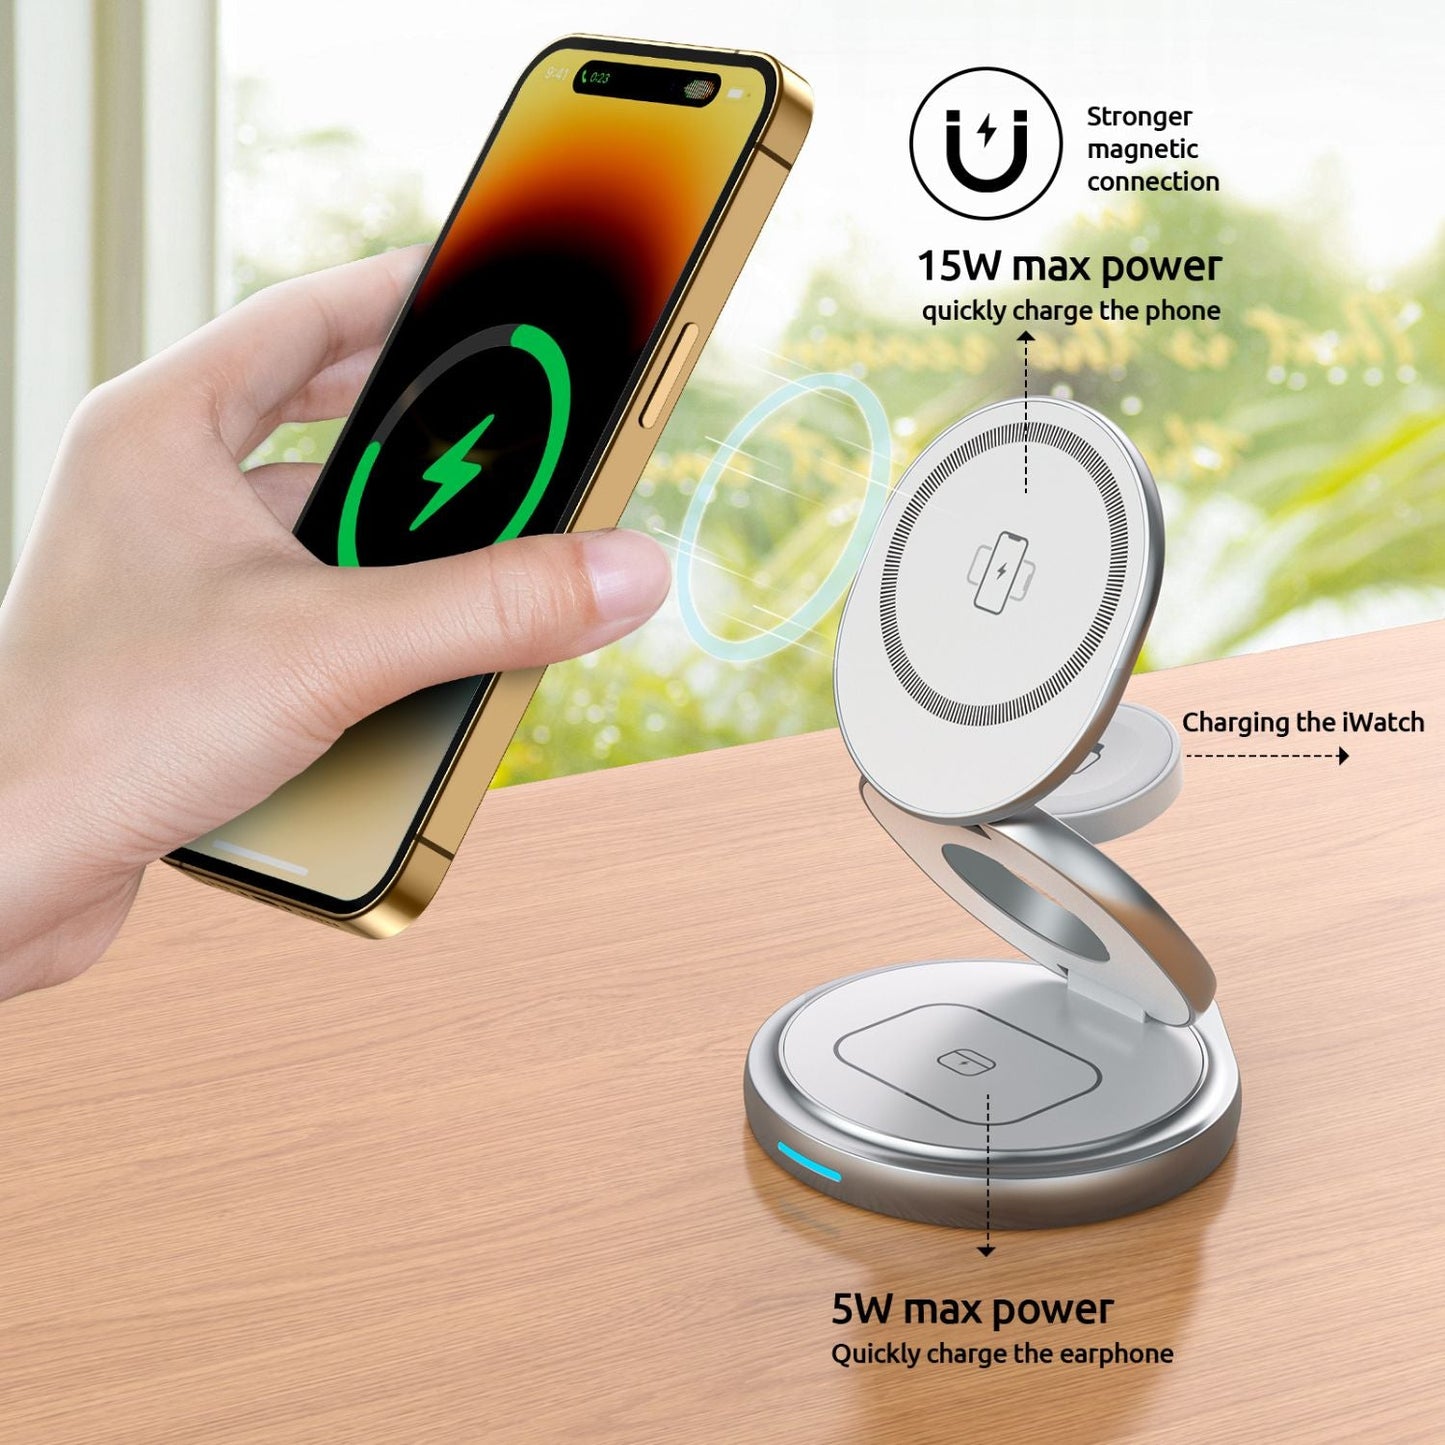 ChargePal Trio: The Ultimate Rotating Charger